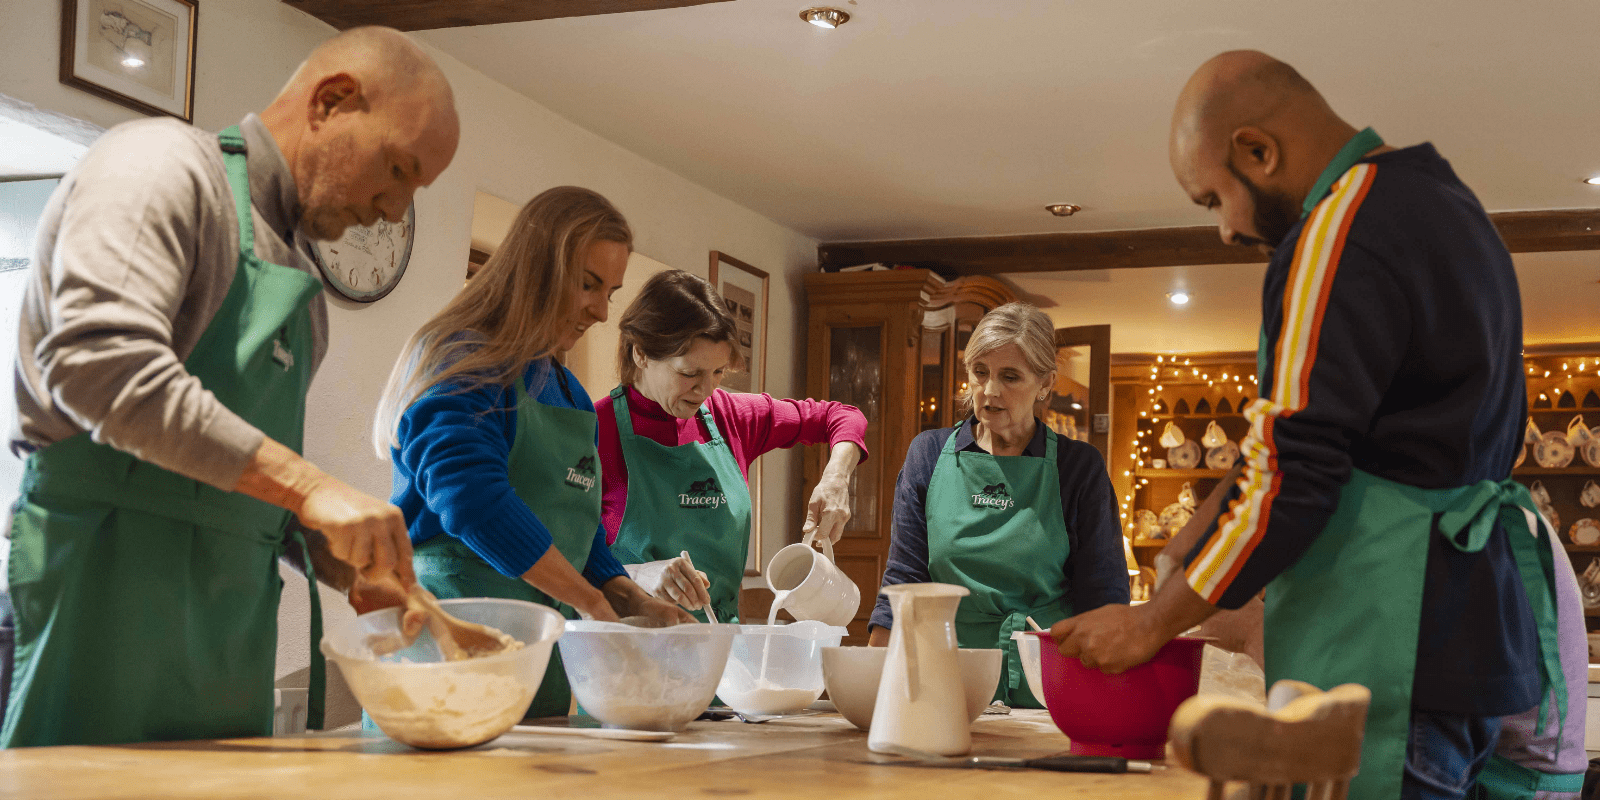 A group of people during cooking workshops at Tracey's farmhouse in Northern Ireland